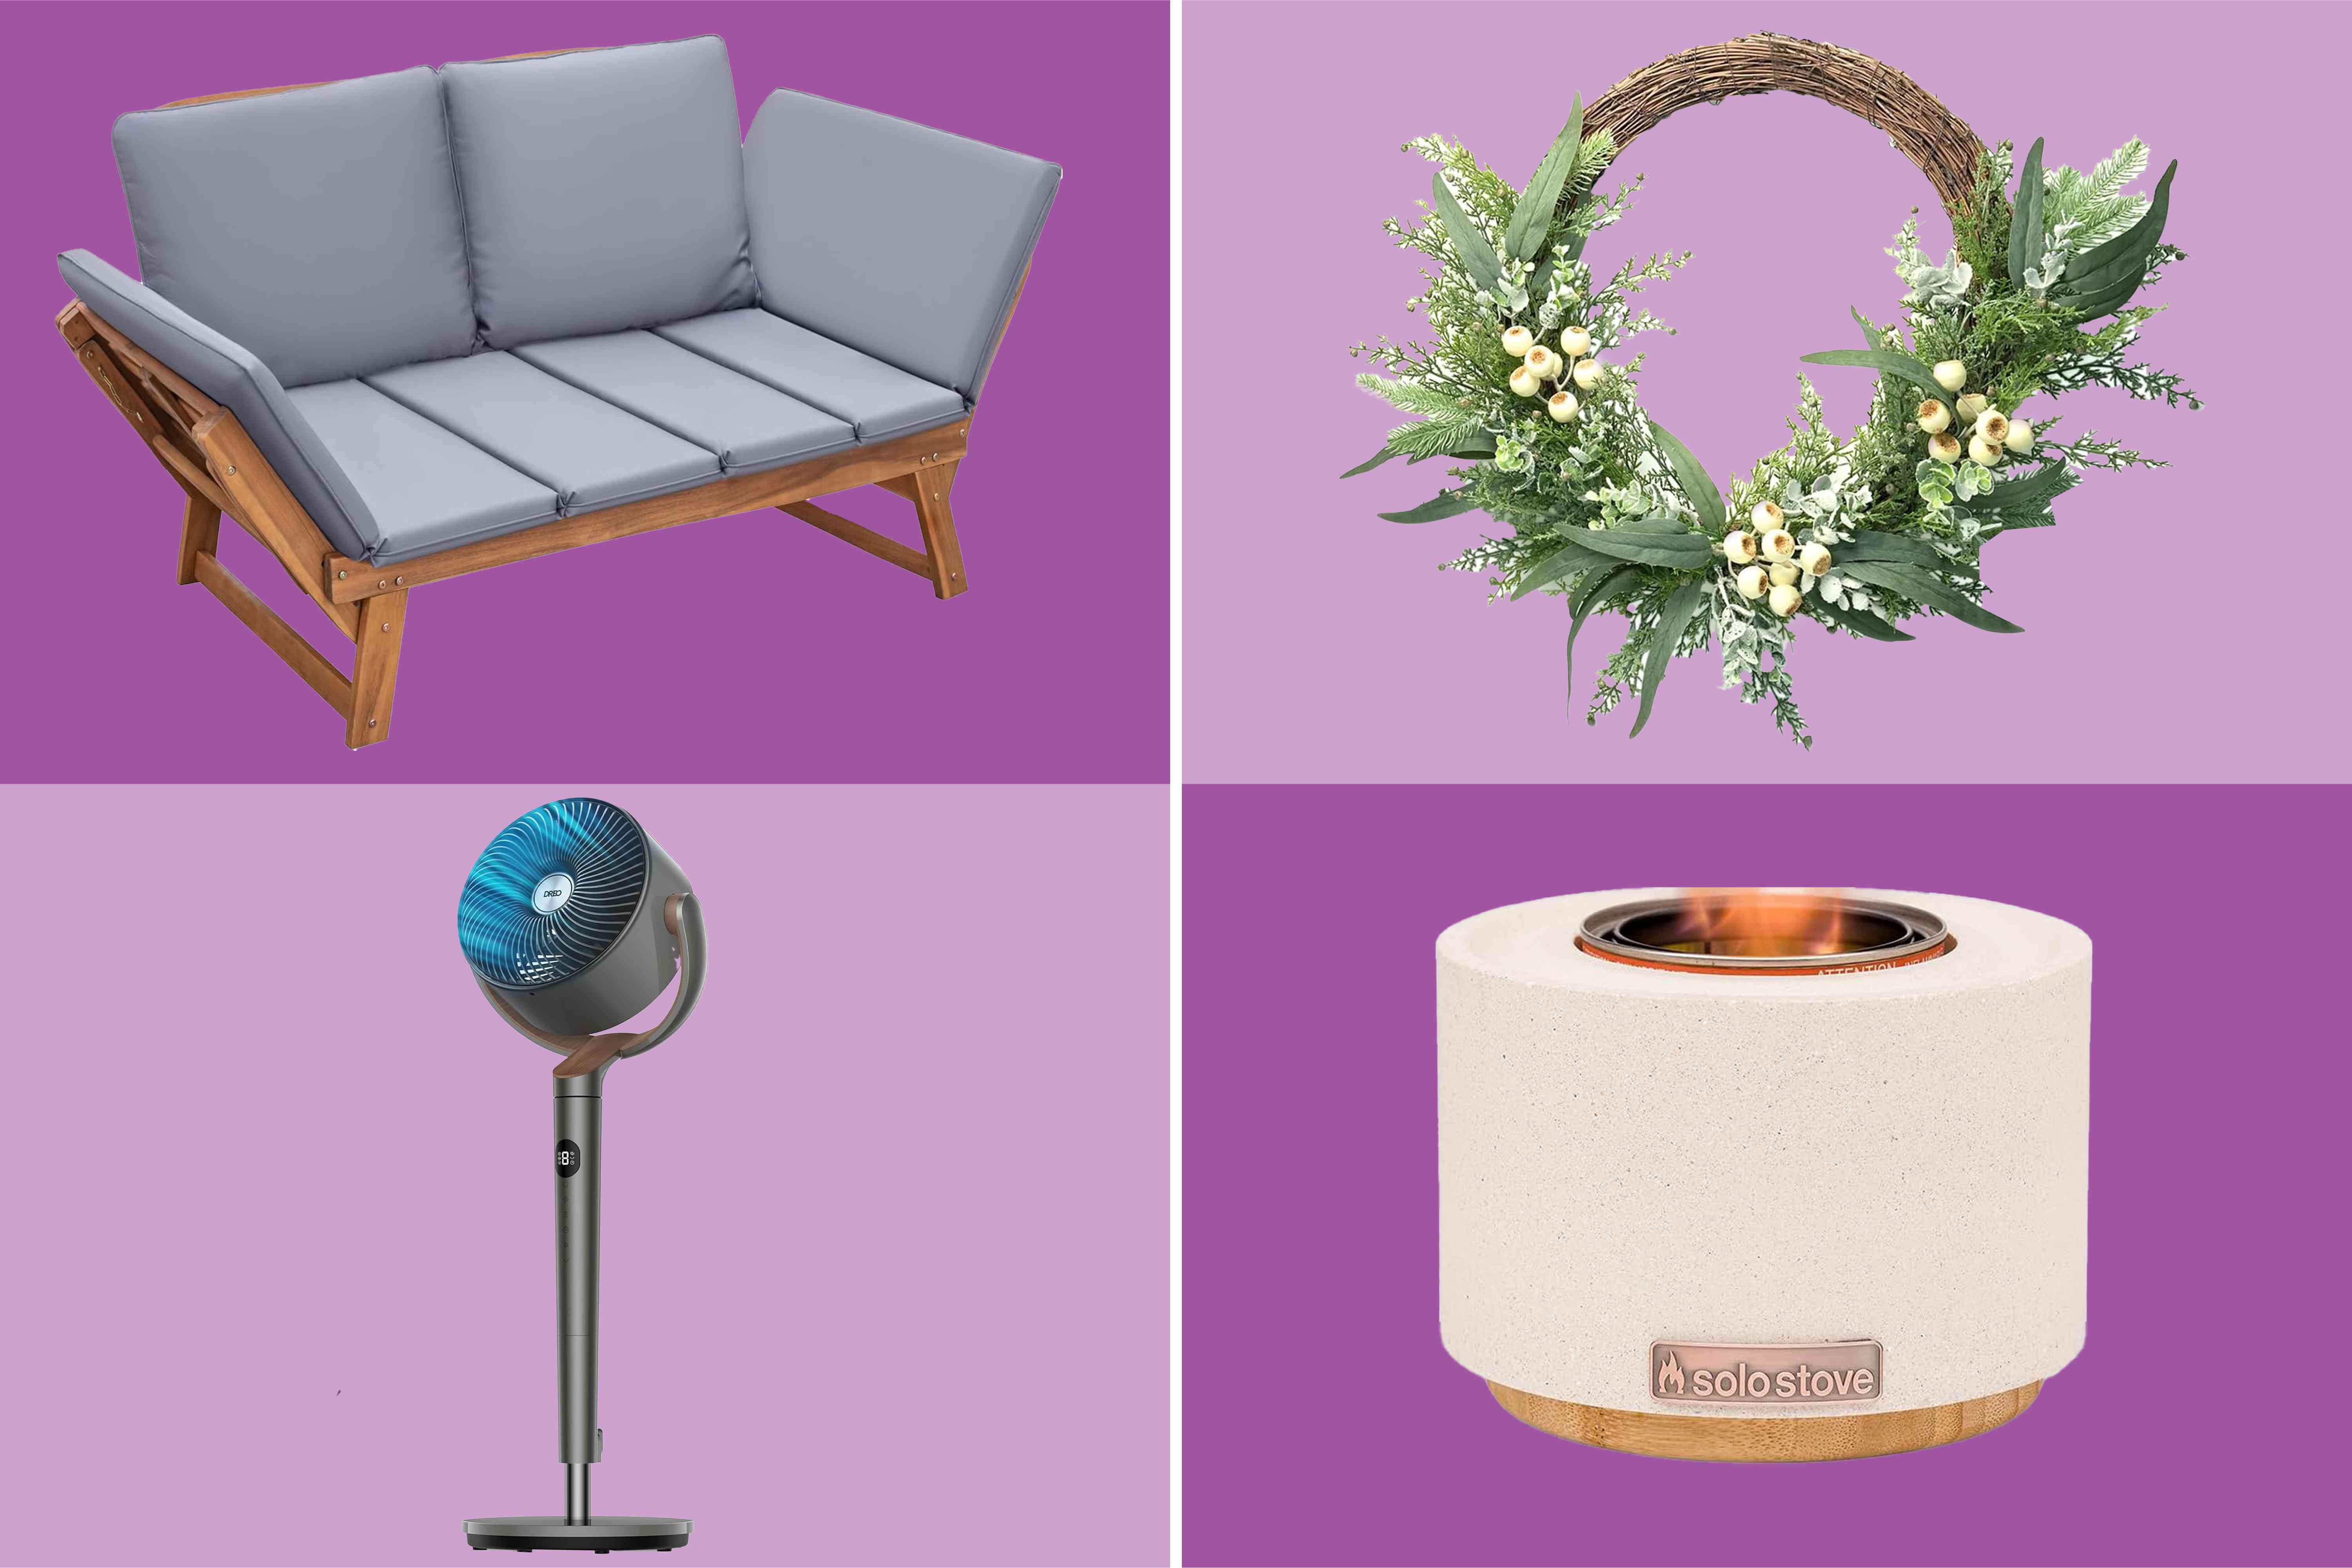 Amazon Just Dropped New Home Products for a Summer Refresh, and These 50 Arrivals Are Worth Shopping